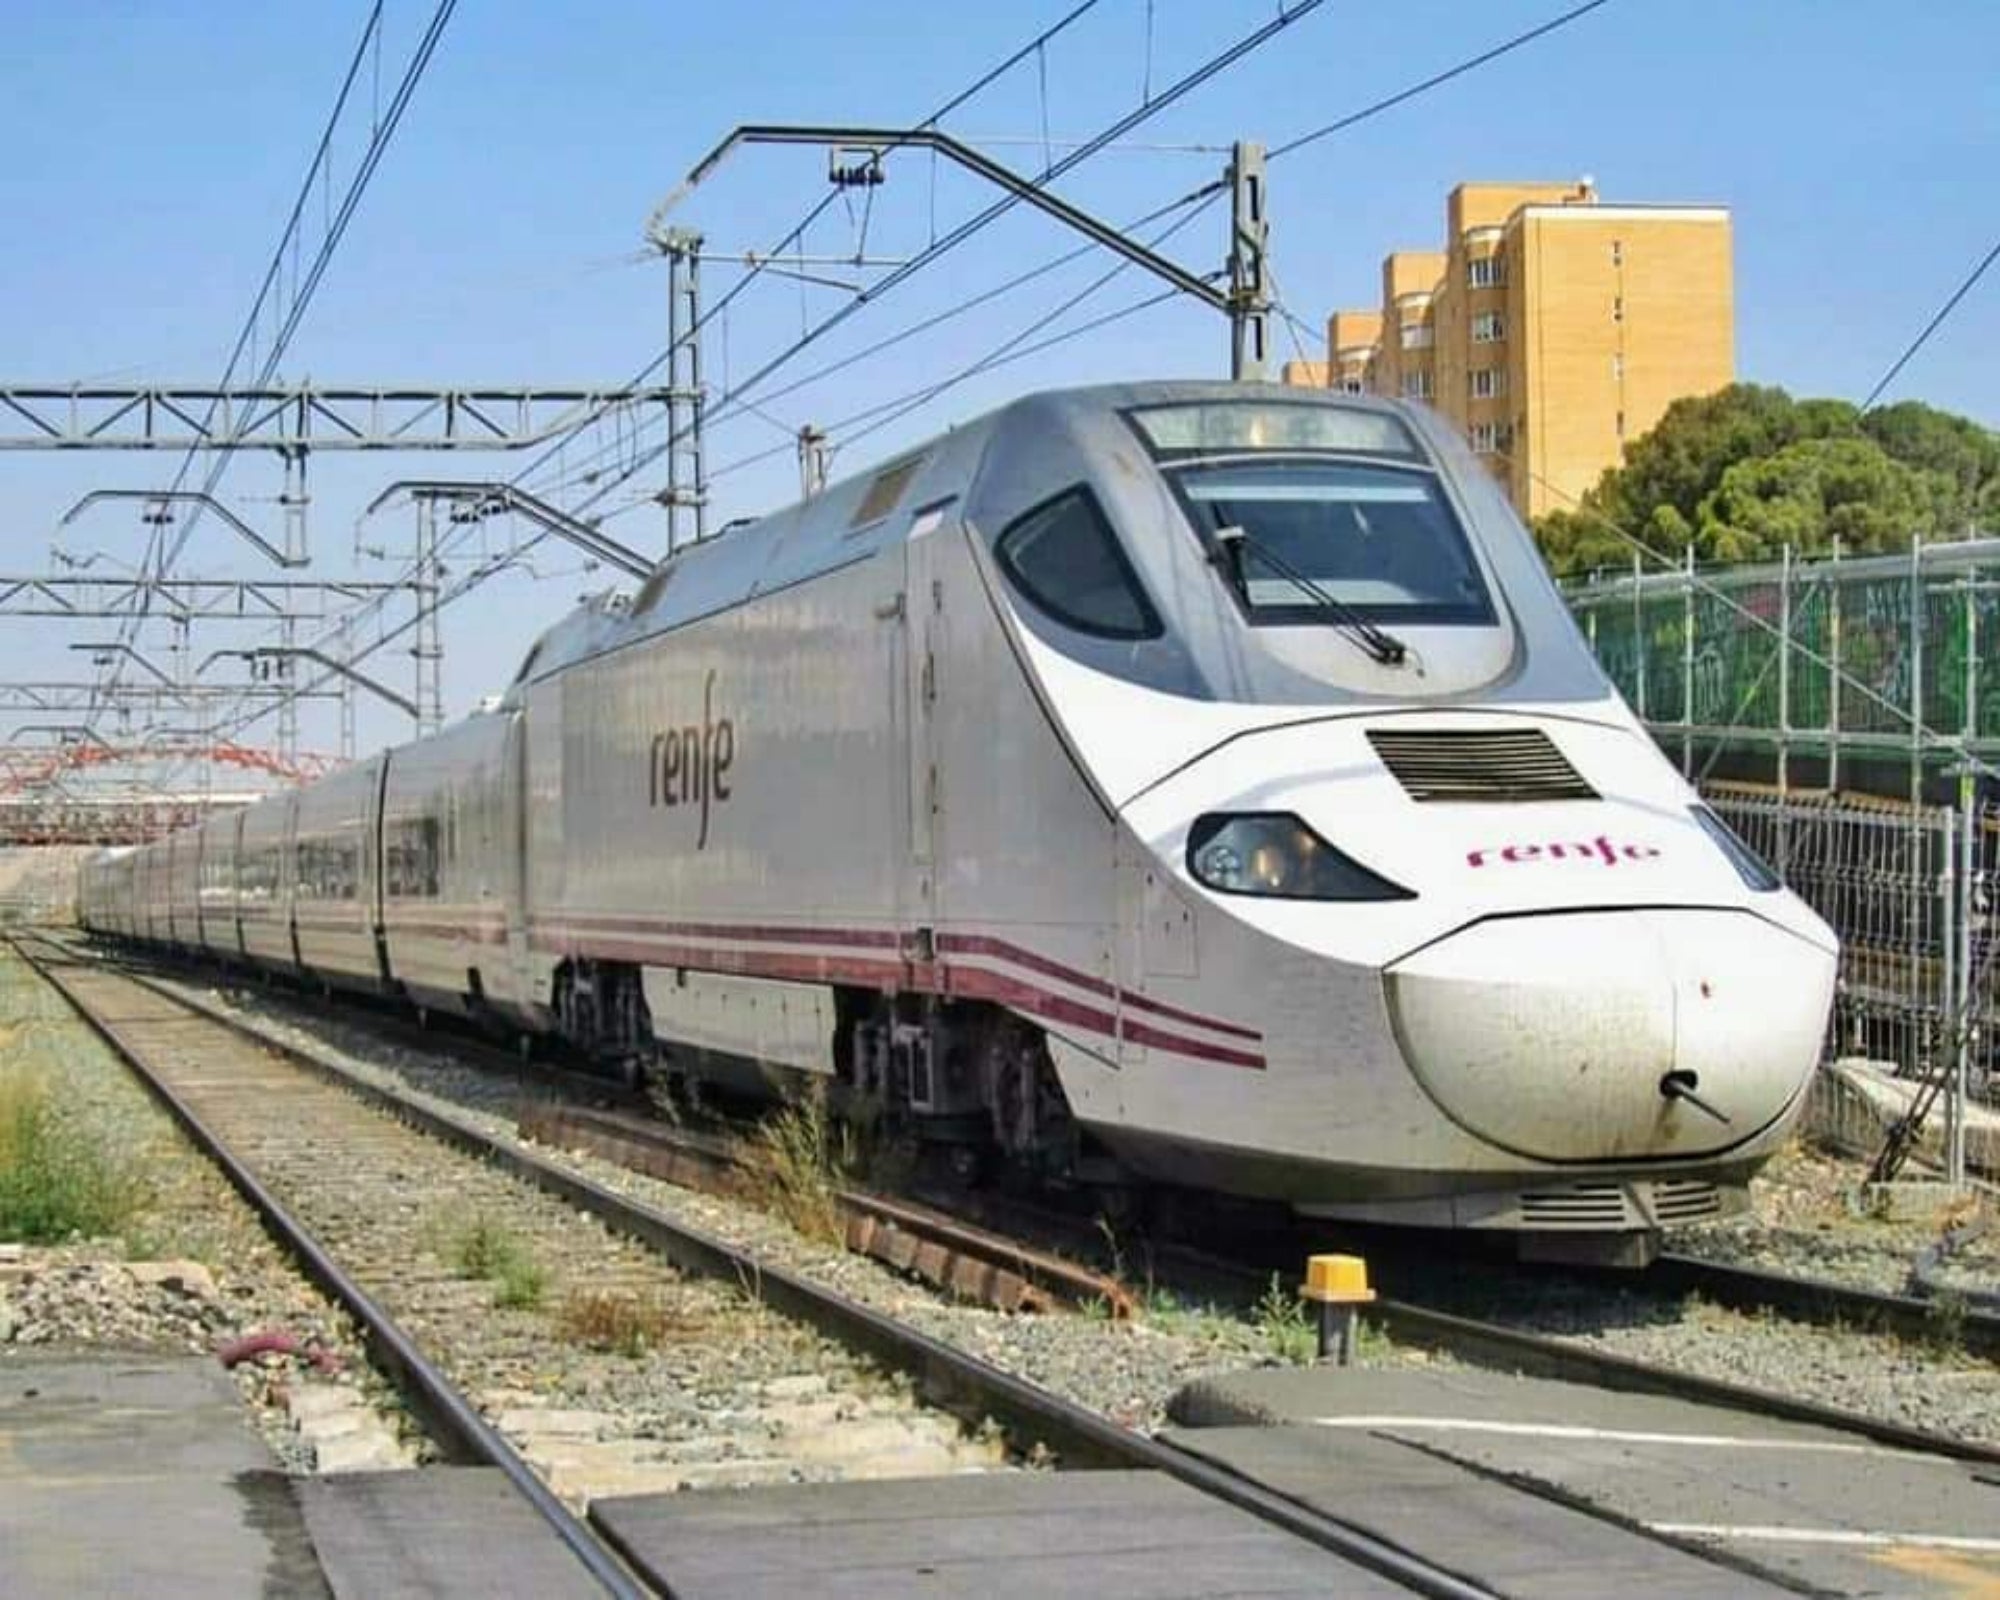 The scheme offers free travel on journeys operated by state-owned Renfe